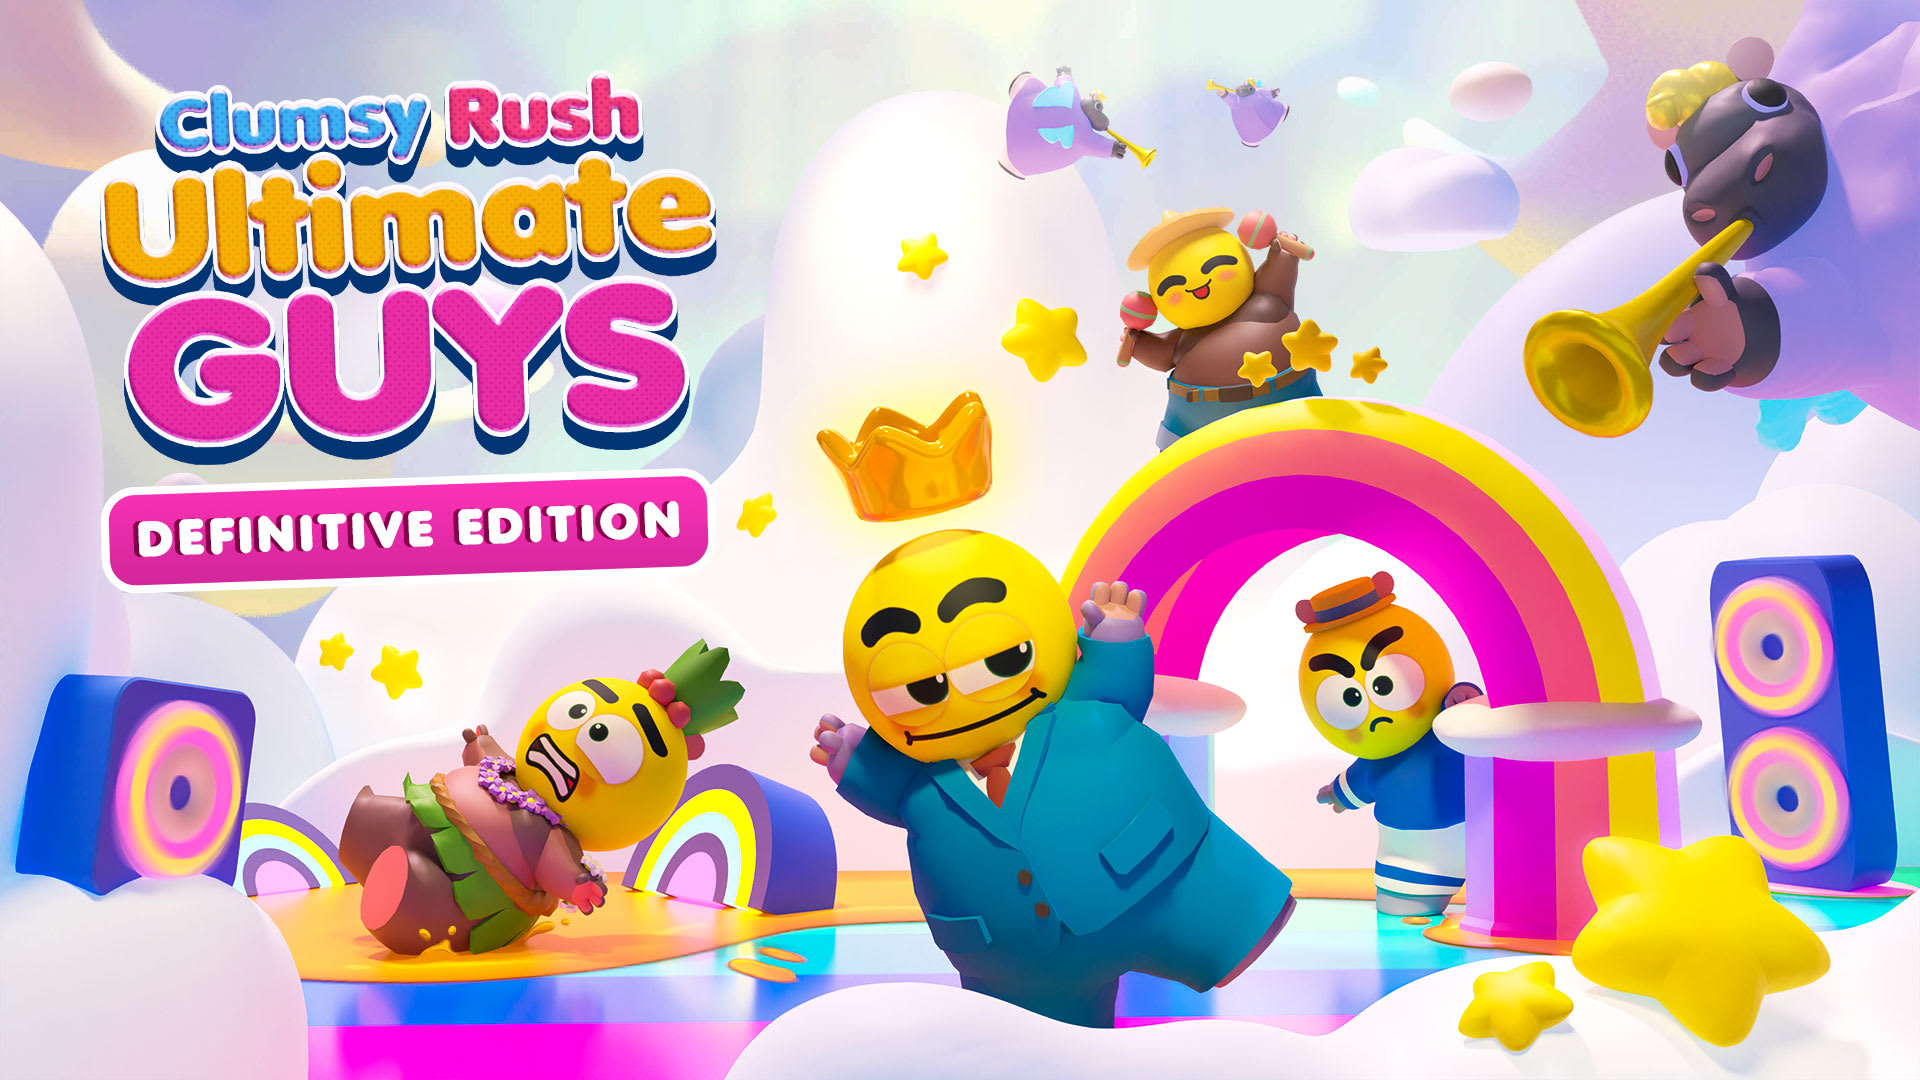 Clumsy Rush: Ultimate Guys Definitive Edition